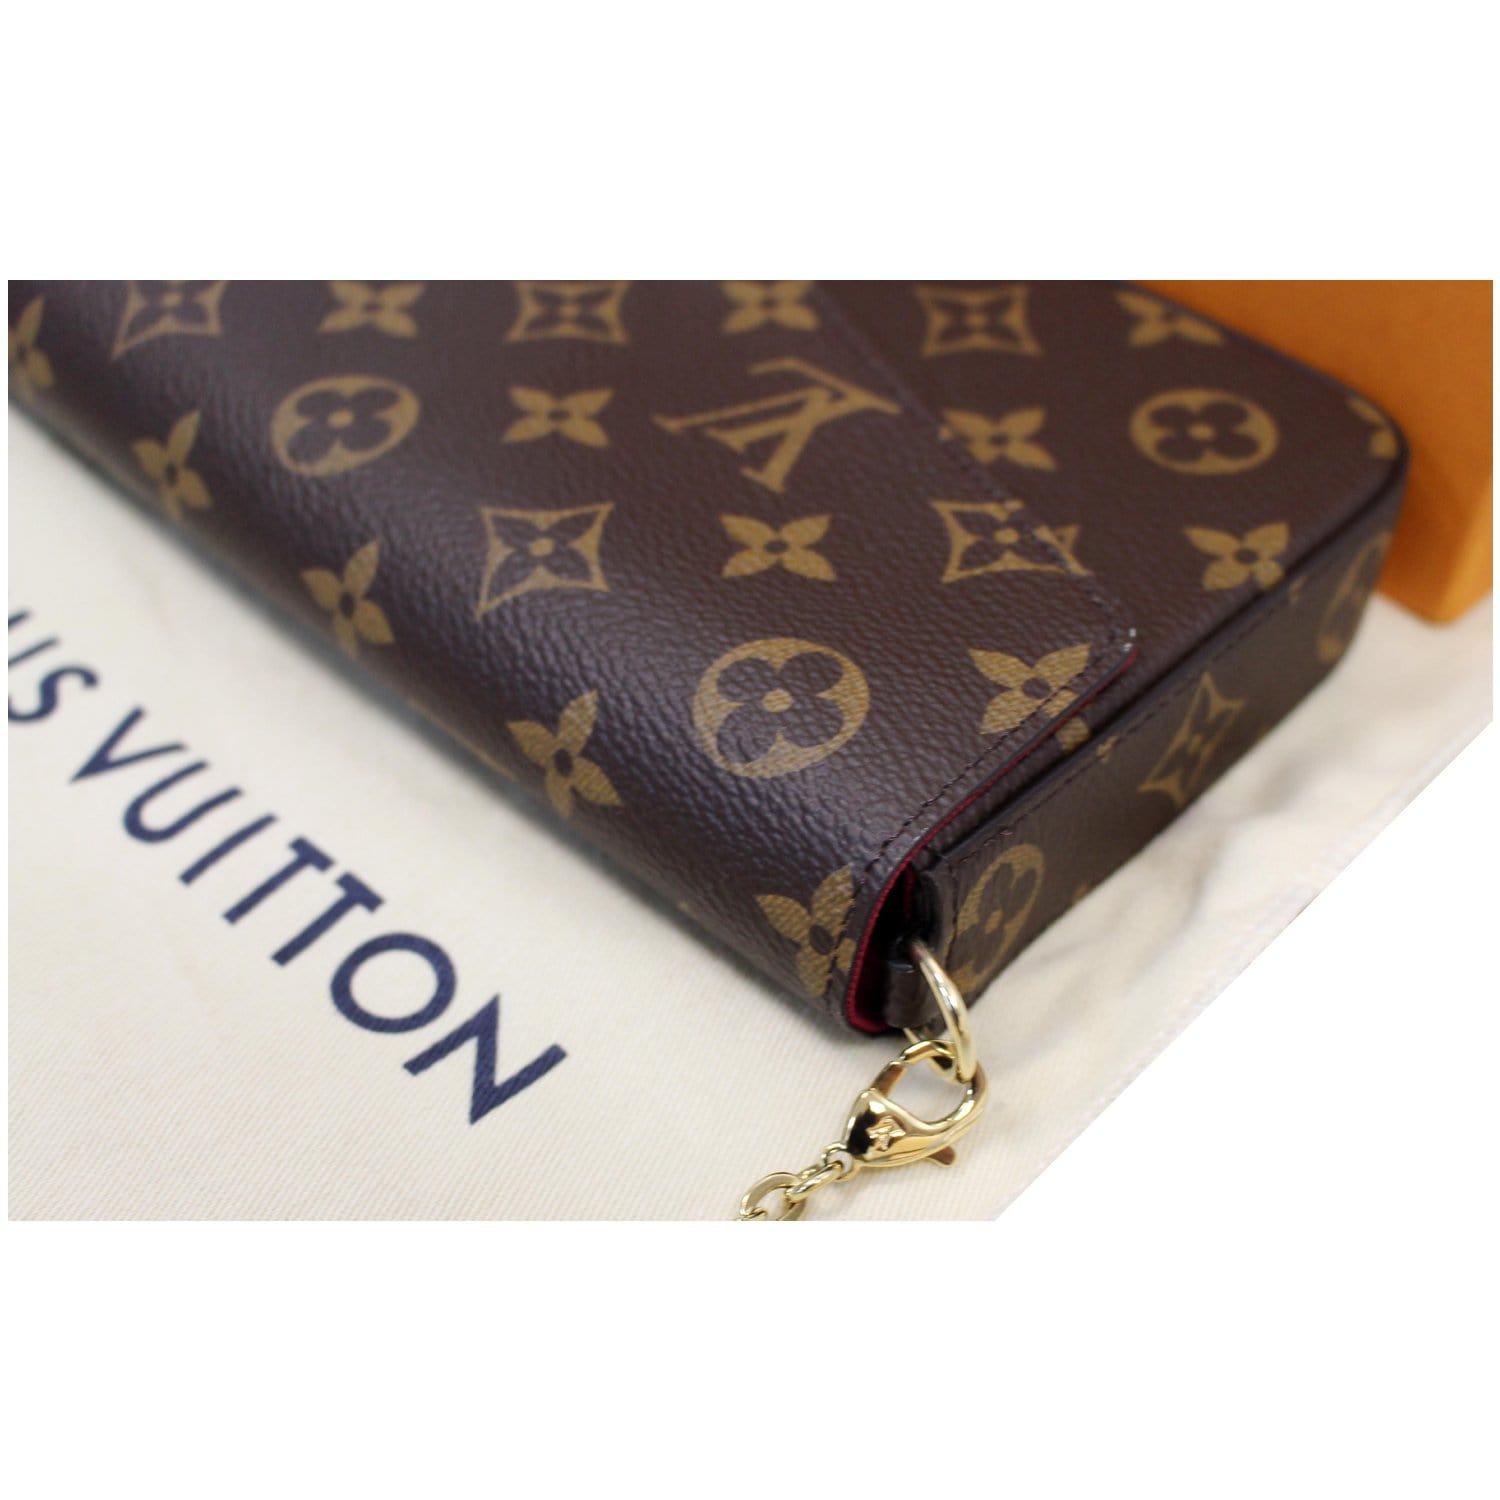 Louis+Vuitton+Felicie+Crossbody+Small+Brown+Canvas%2FLeather for sale  online